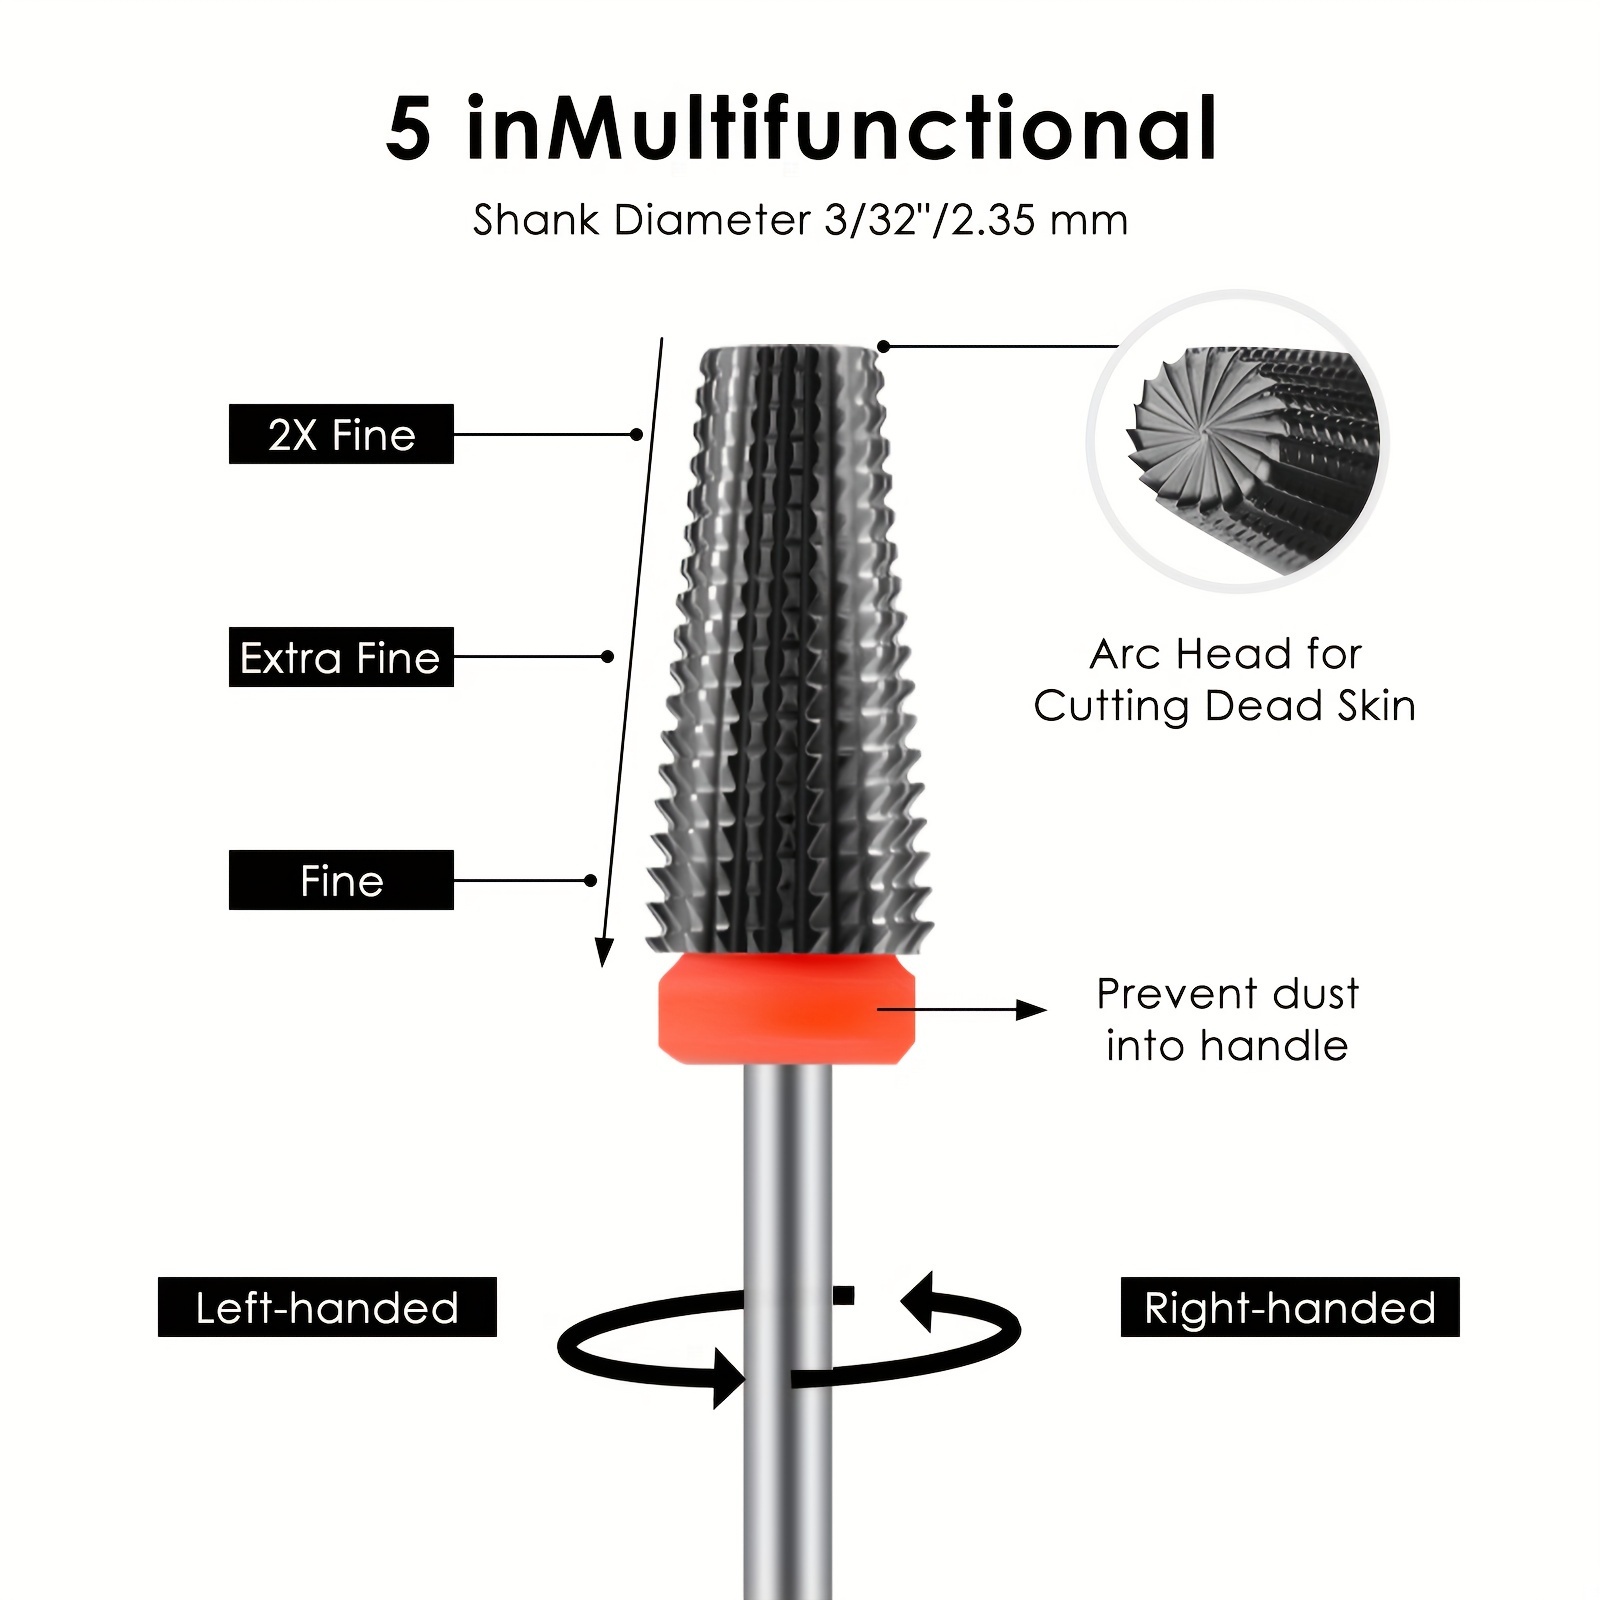 

Nail Carbide 5 In 1 Bit - 2 Way Rotate Use For Both Left And Right Handed - Fast Remove Acrylic Or Hard Gel - 3/32" Shank - Manicure, Nail Art, Drill Machine